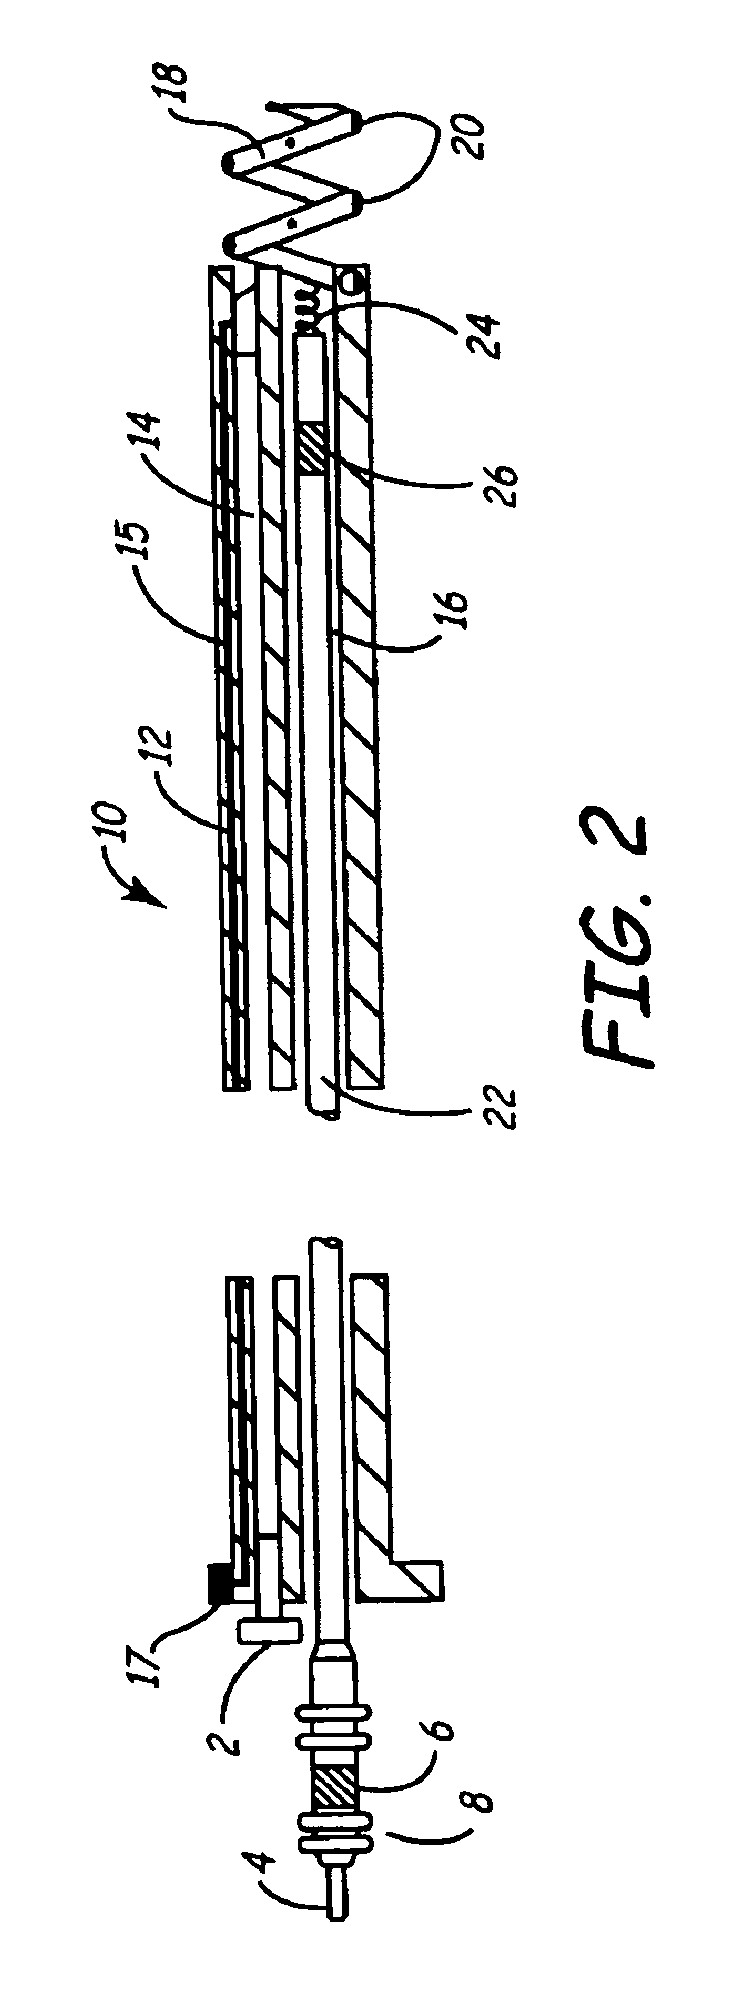 Delivery of active fixation implatable lead systems